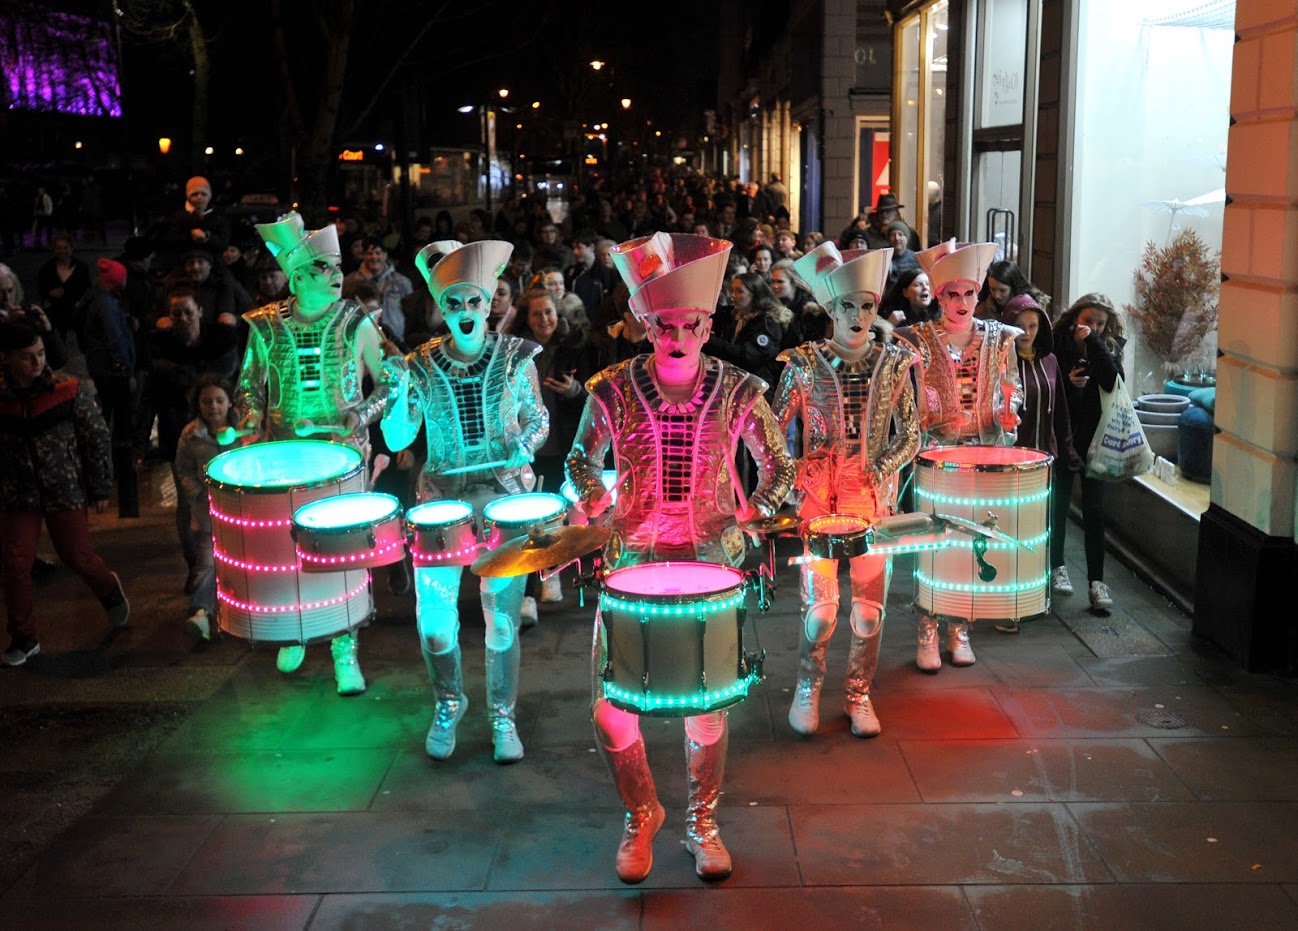 Spark! street performers lit up in different colours being watched by spectators